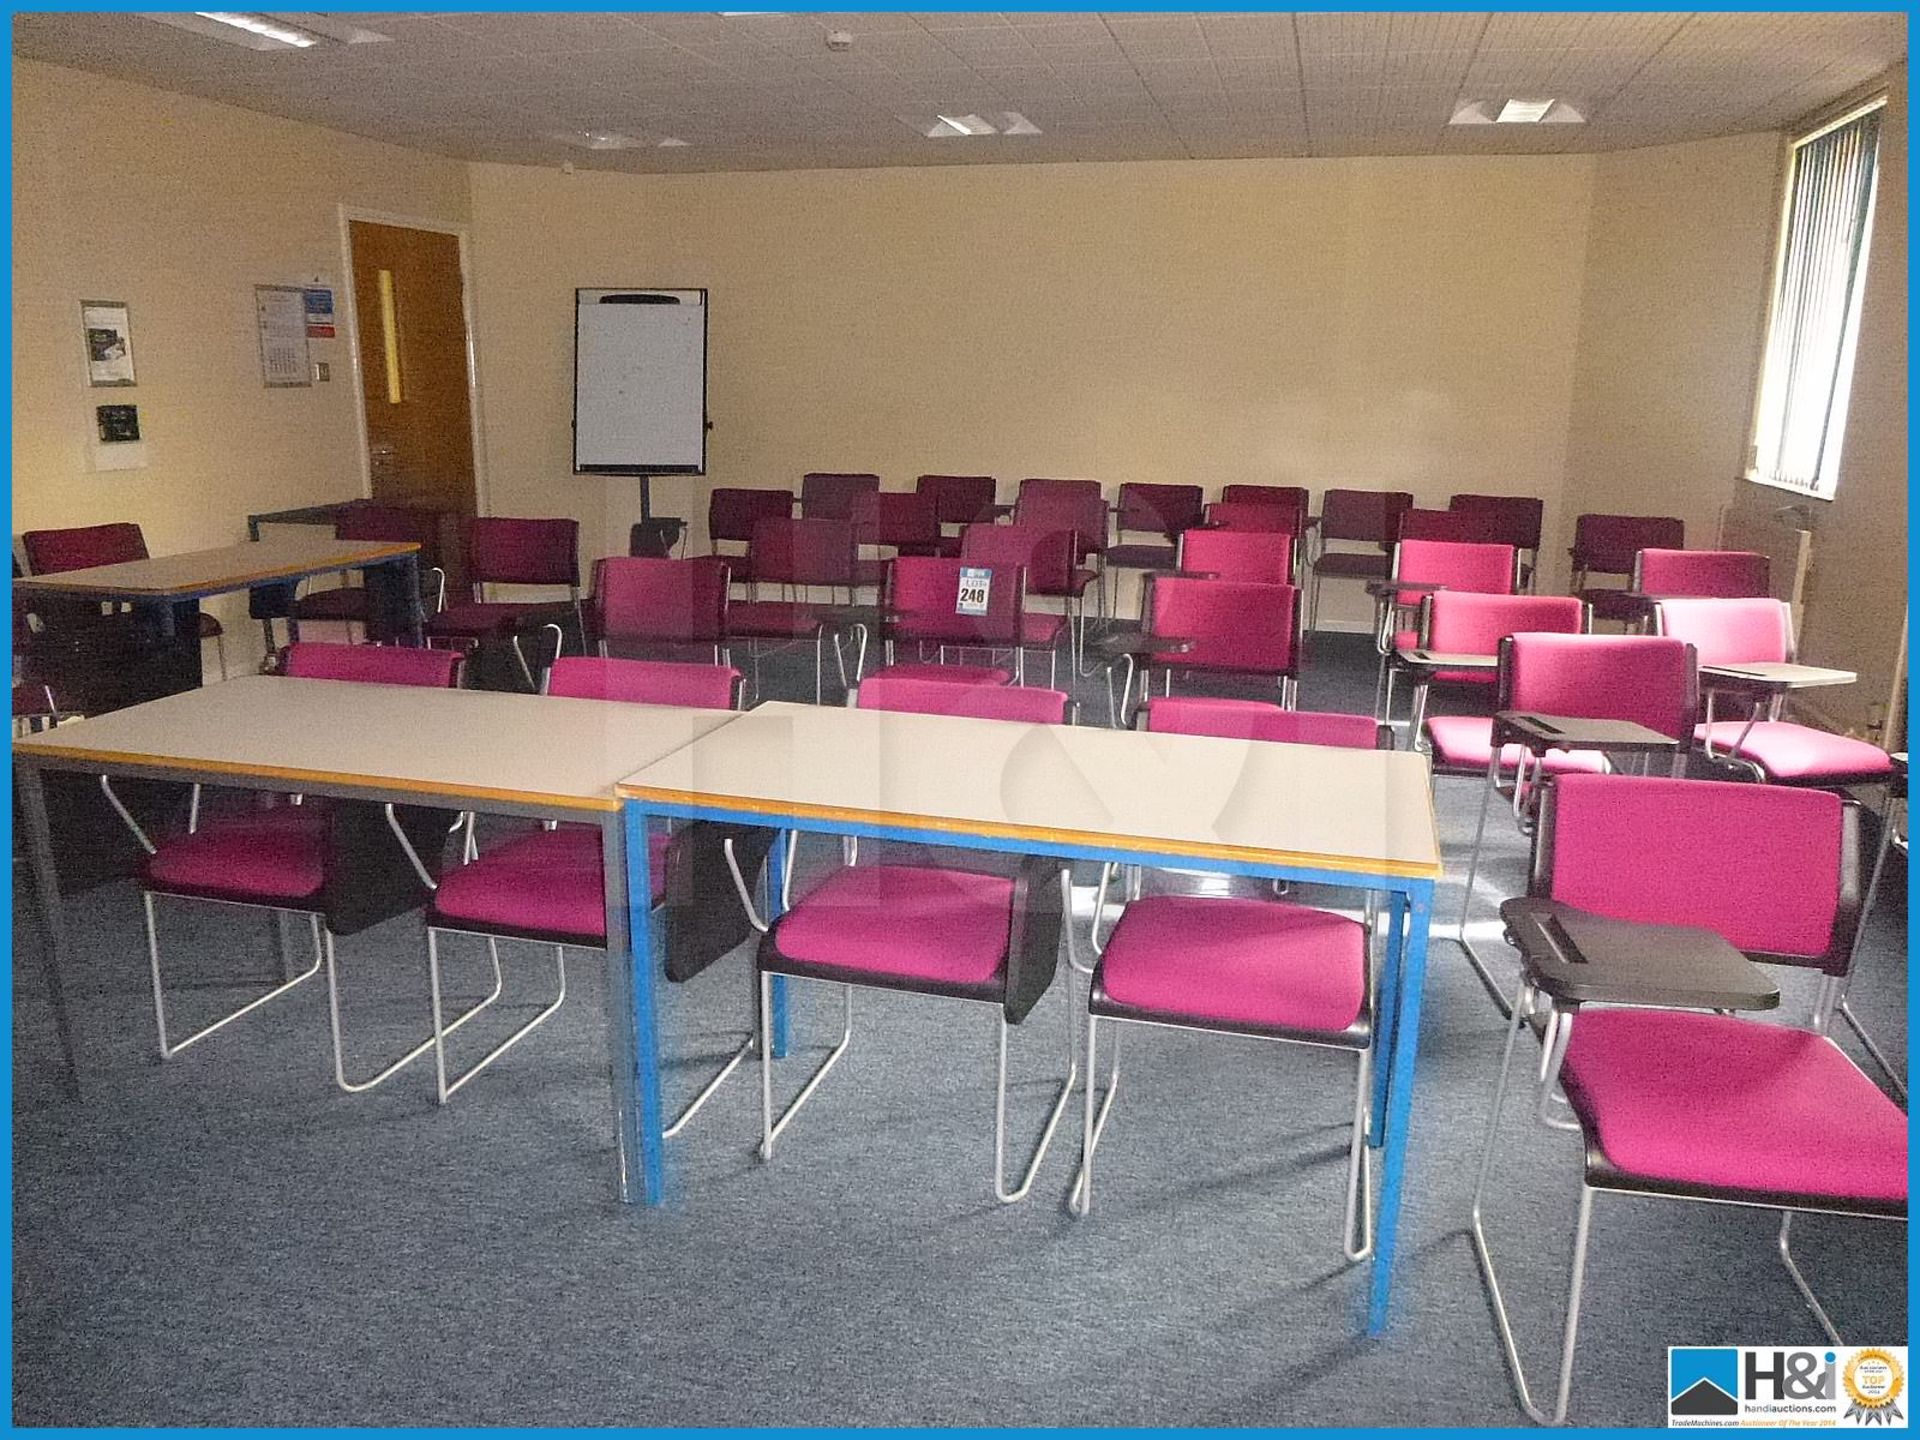 35 OFF LECTURE CHAIRS - Image 2 of 2